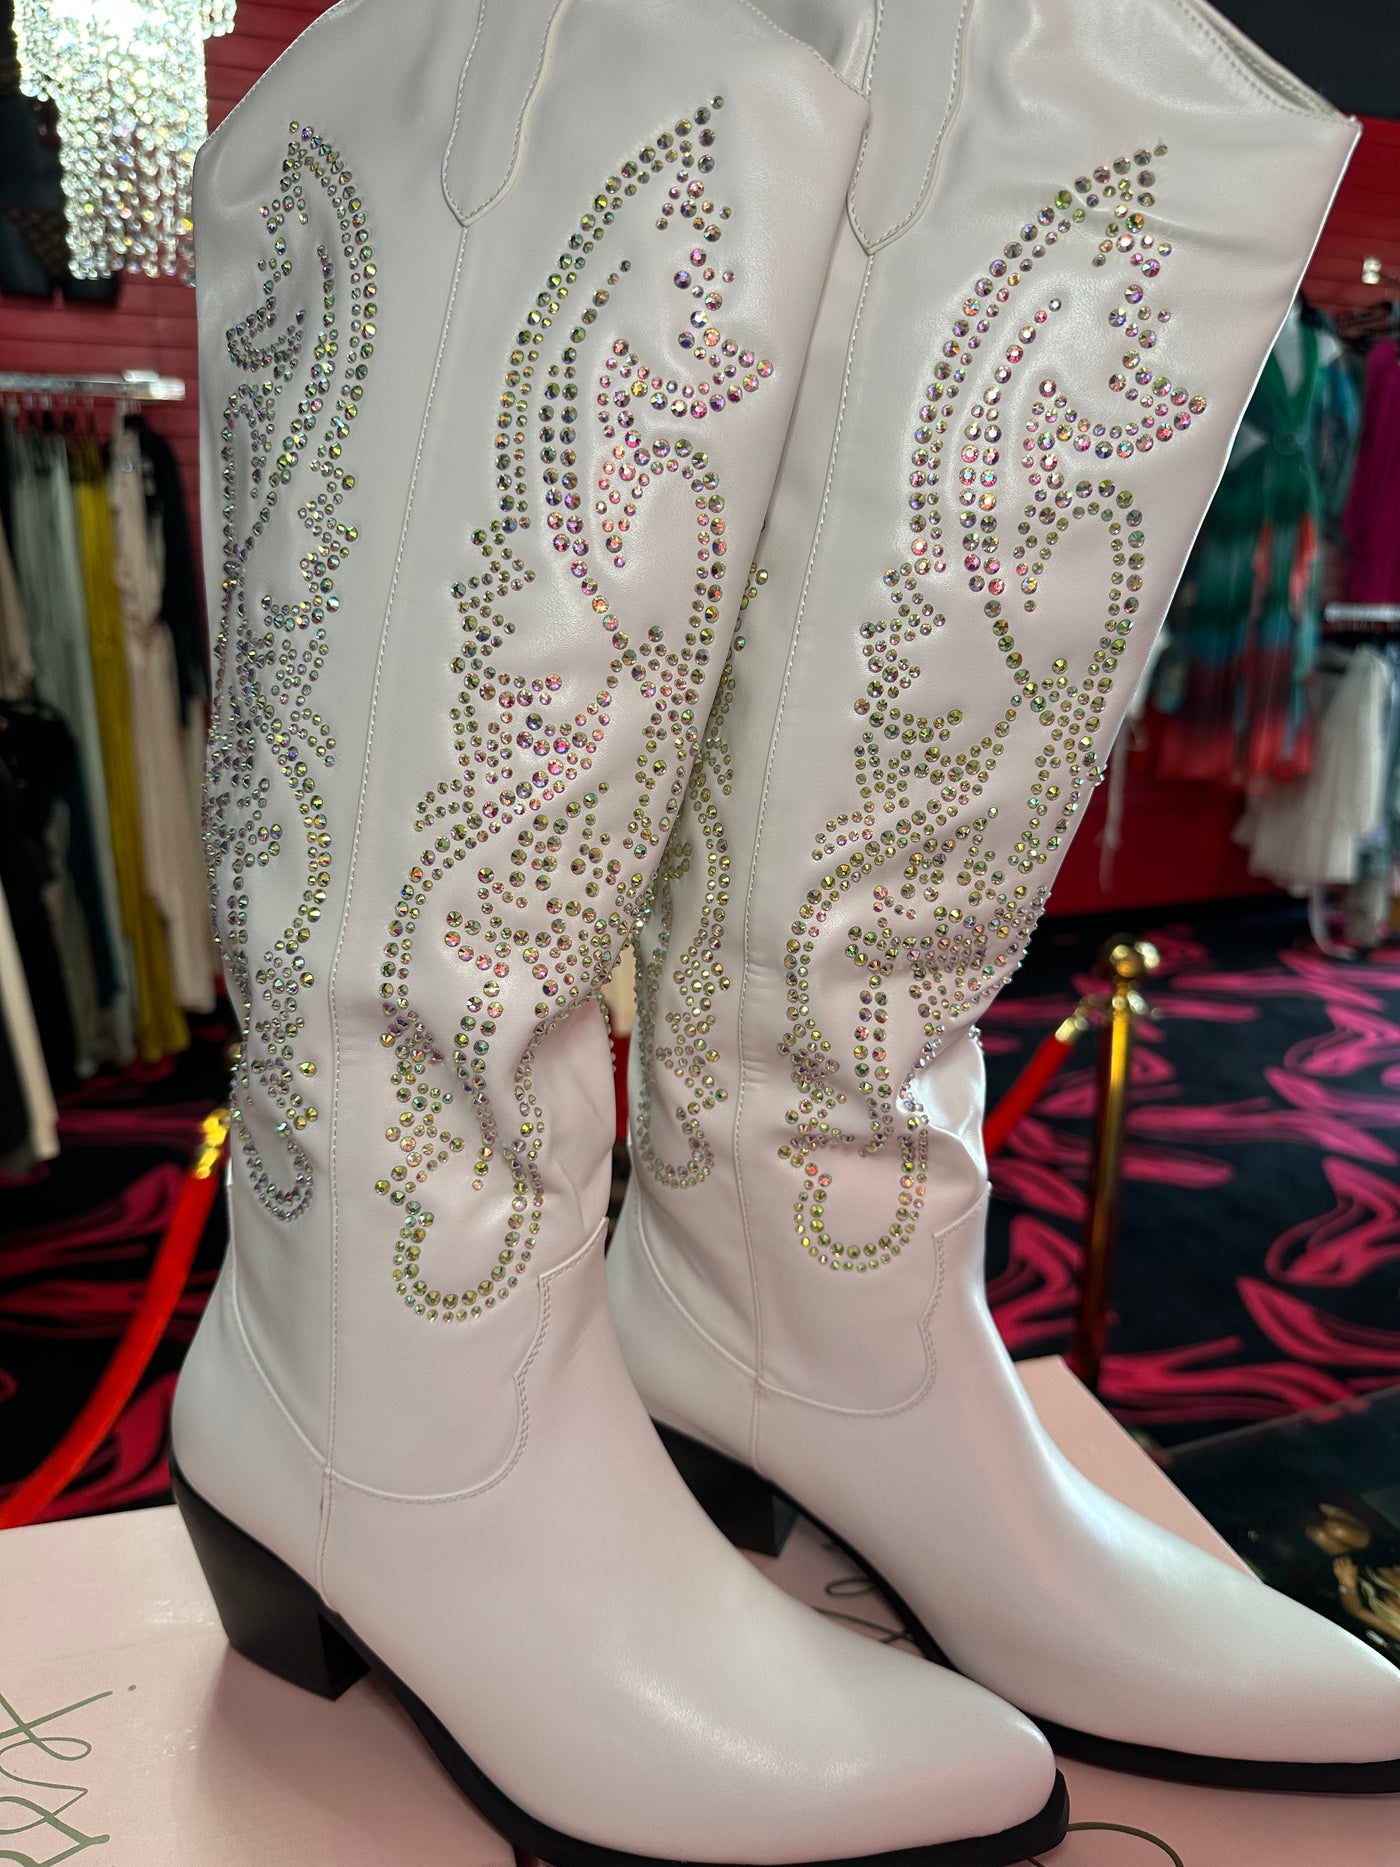 Bring the bling cowgirl boots